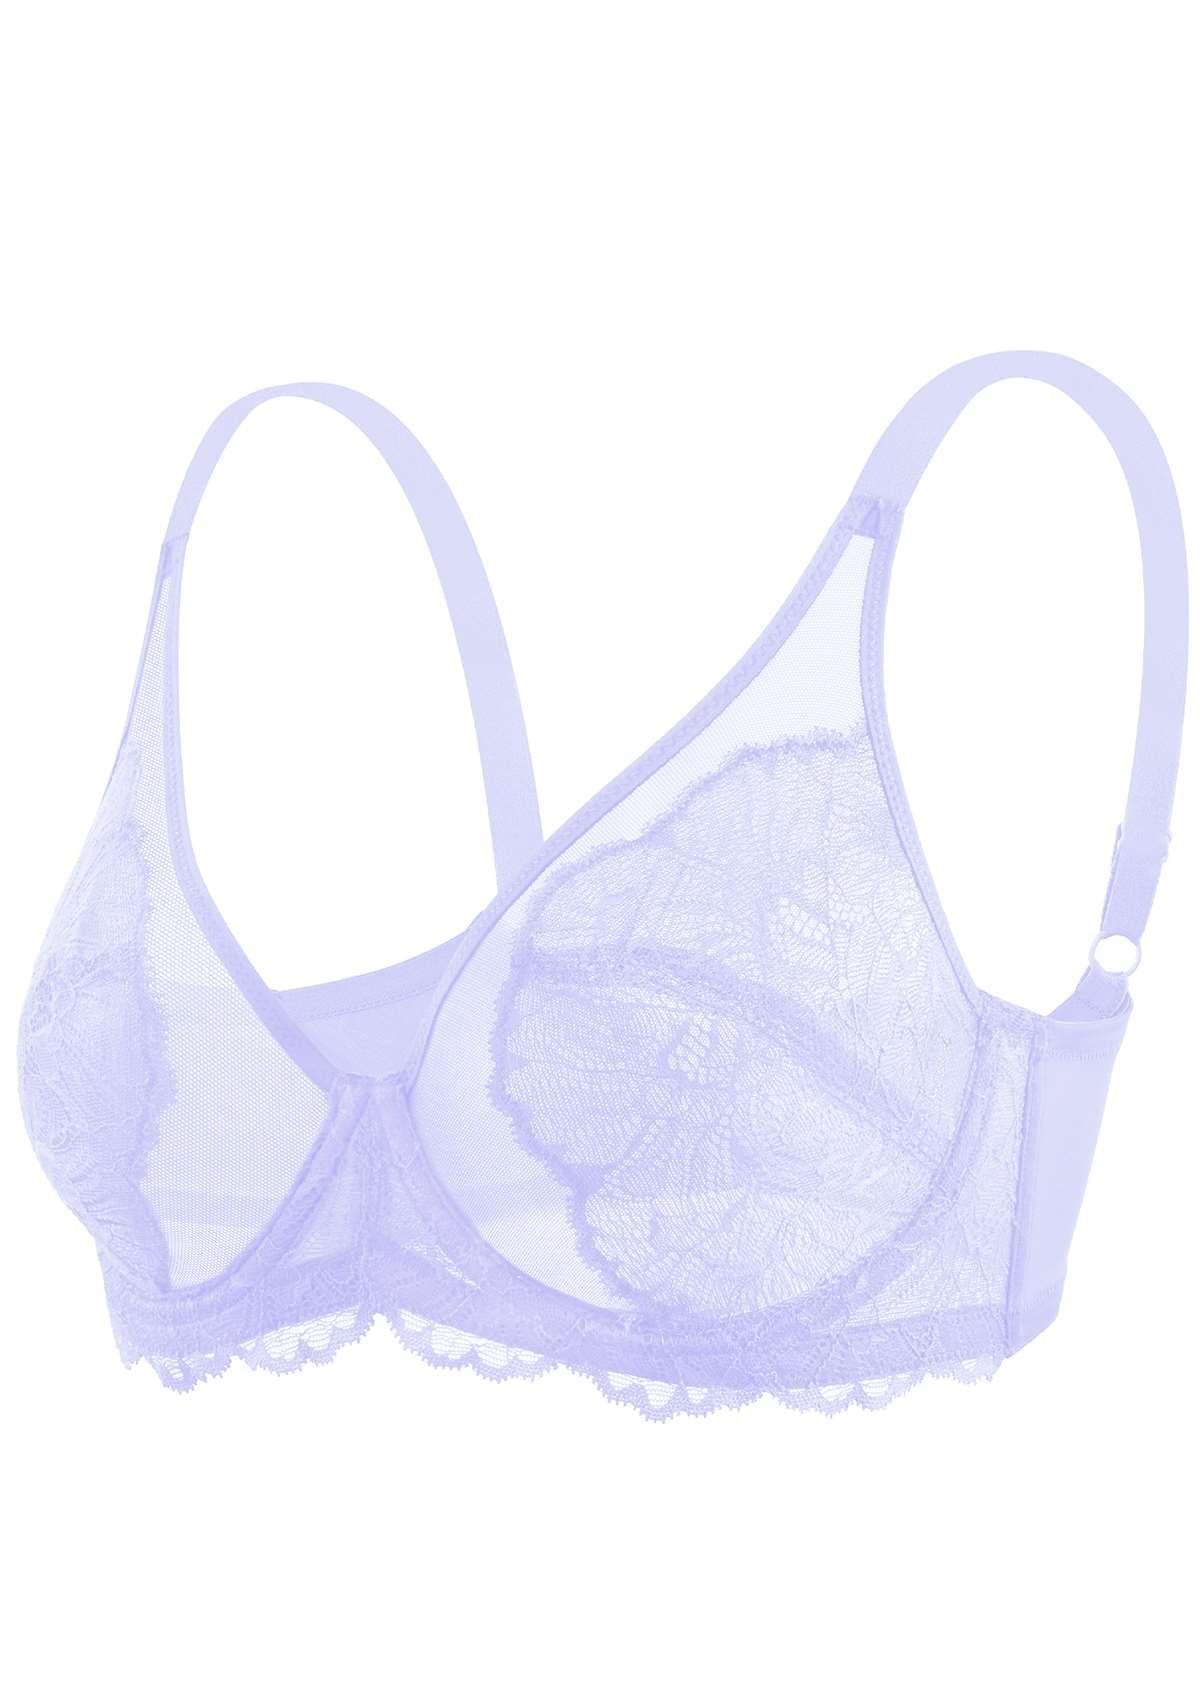 HSIA Blossom Transparent Lace Bra: Plus Size Wired Back Smoothing Bra - Purple / 42 / D